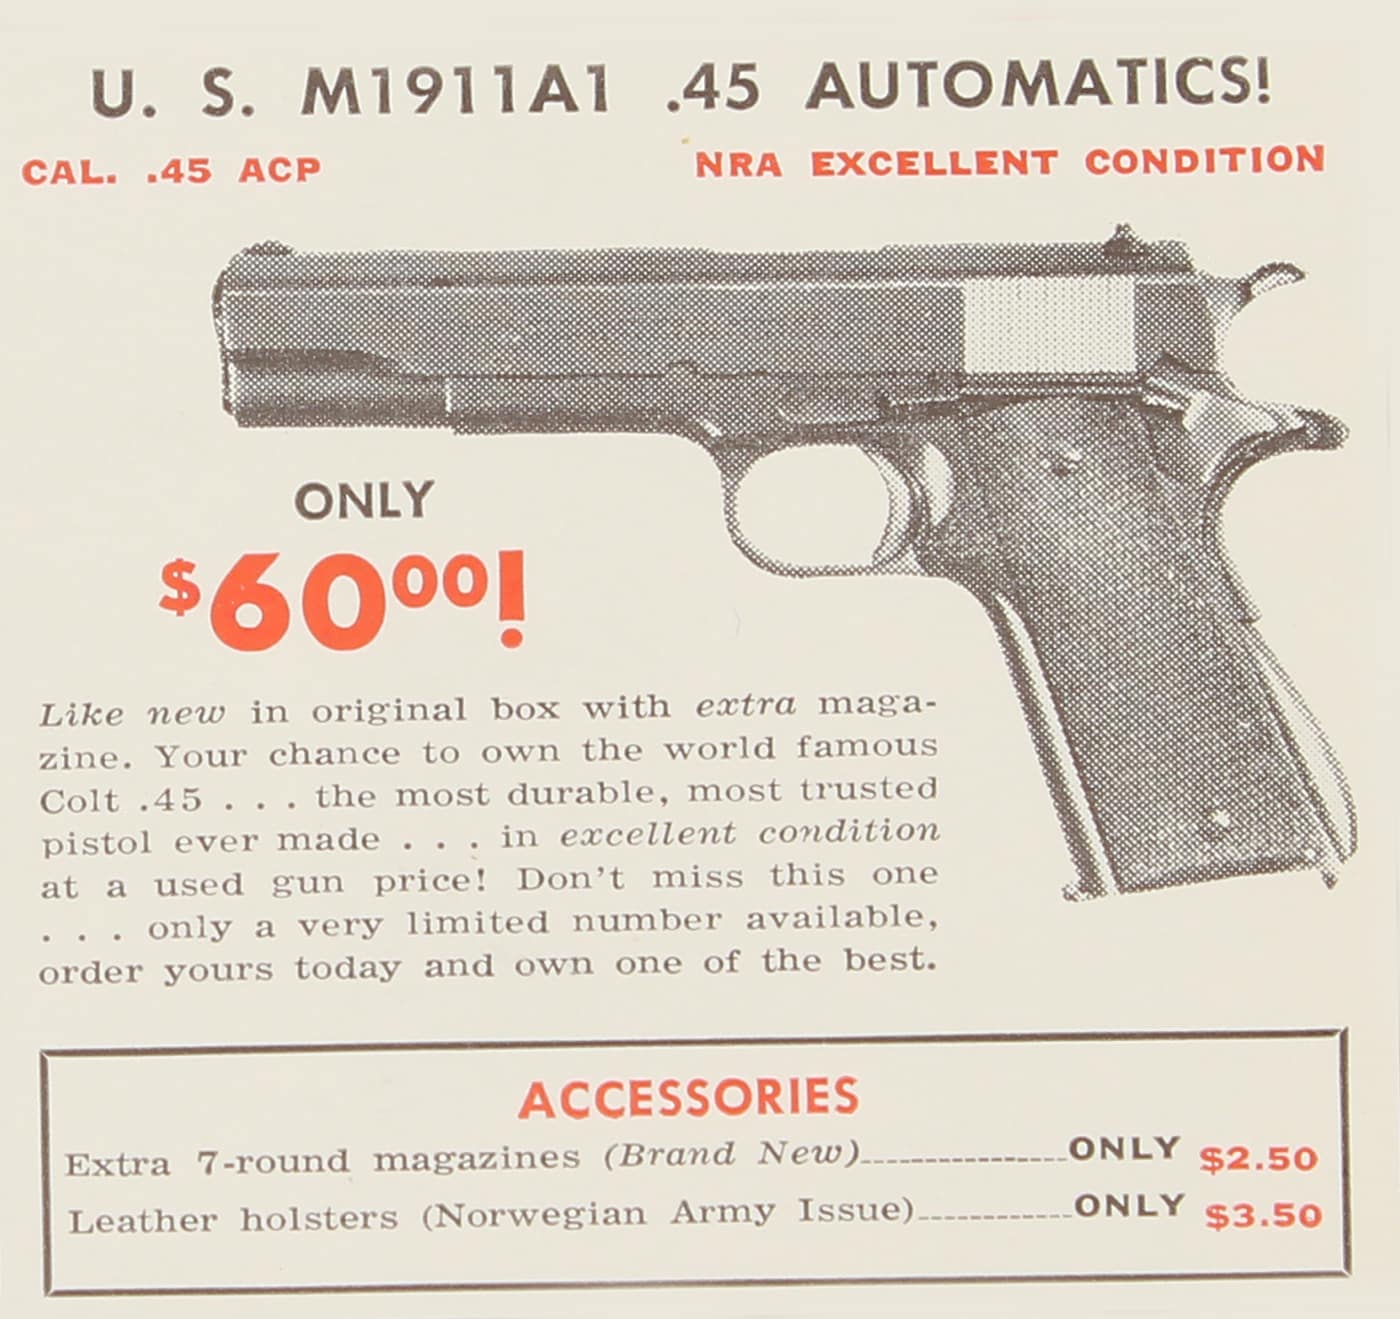 This is a digital scan of a M1911A1 surplus advertisement from the 1960s. Made by Colt, these guns were in like new condition in the original boxes with a spare magazine. The price was only $60.